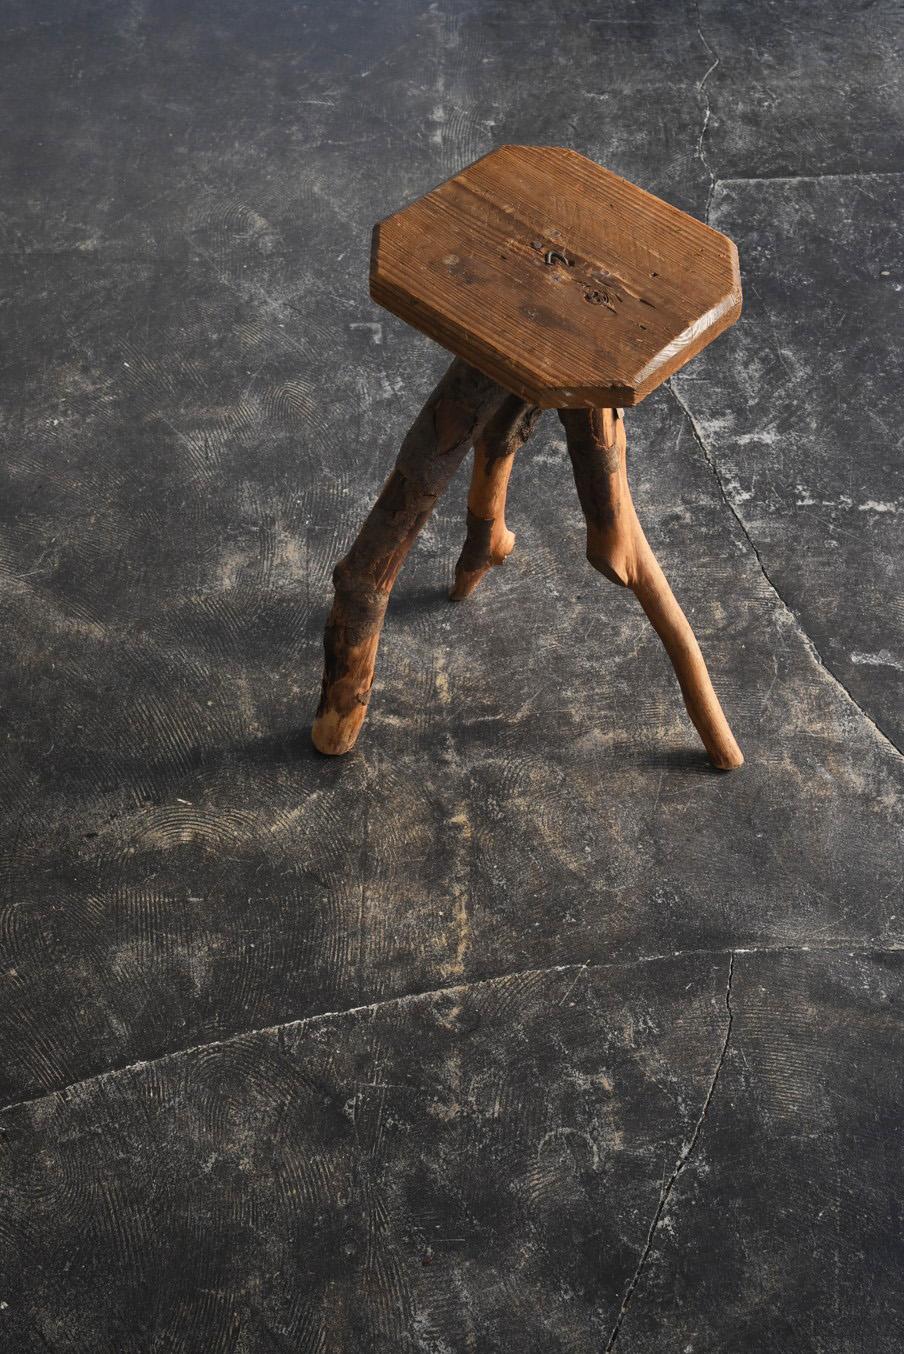 This is a stool made from Japanese tree branches.
In Japan, chairs like this were often made using natural wood.
I think they probably made them themselves and used them as work chairs in farms and private homes.
It is thought to have been built